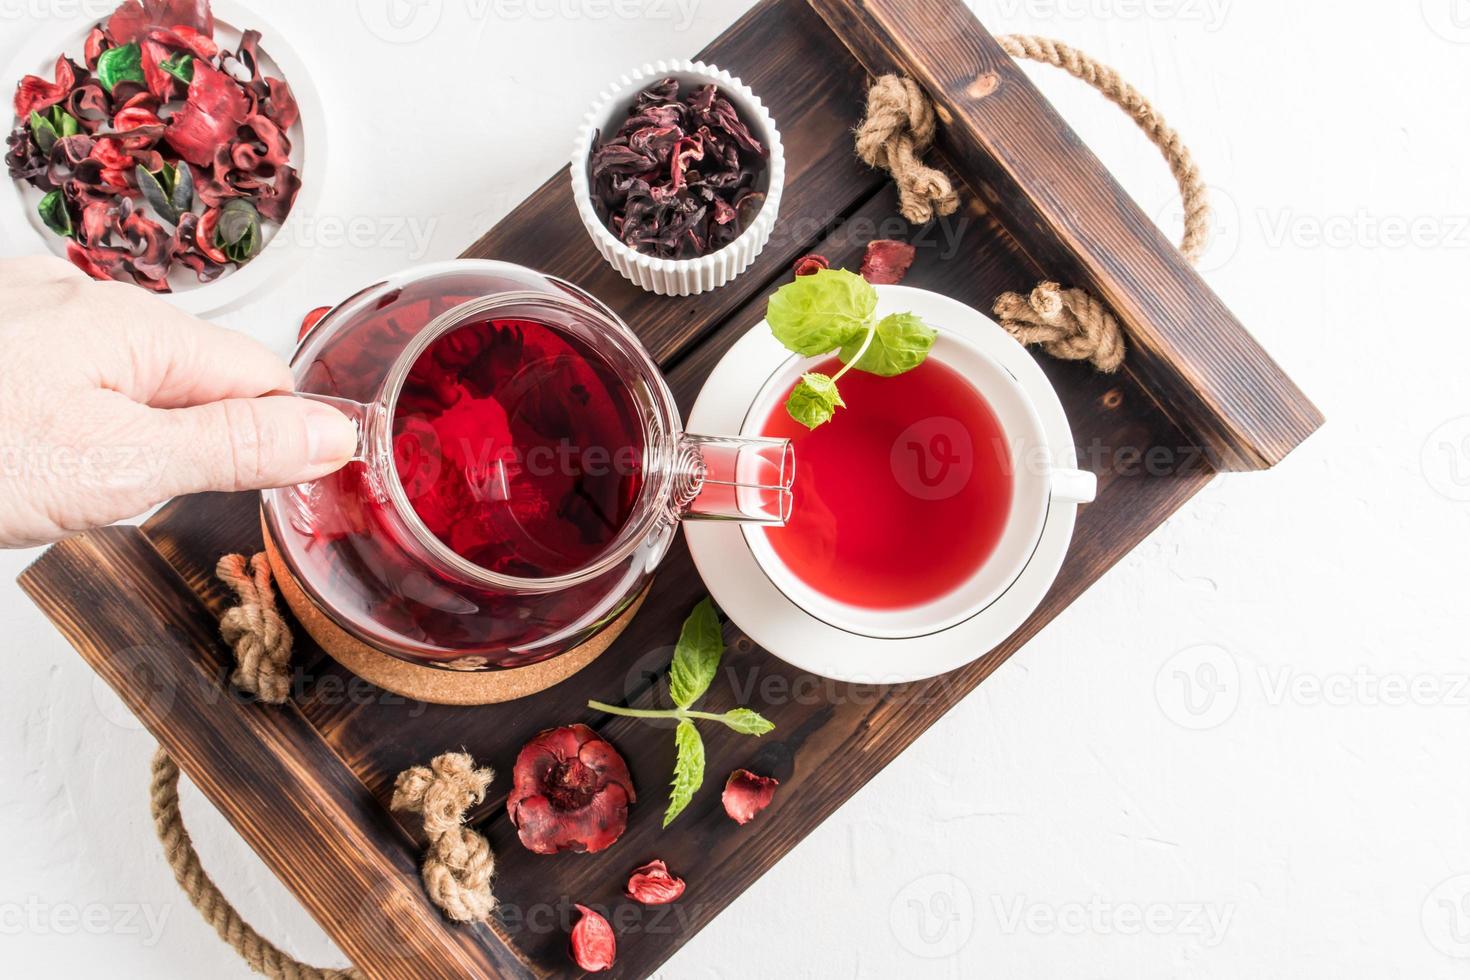 tea ceremonia . a woman's hand pours fragrant red hibiscus tea into a cup of mint leaves. top view of the wooden tray with morning tea. photo